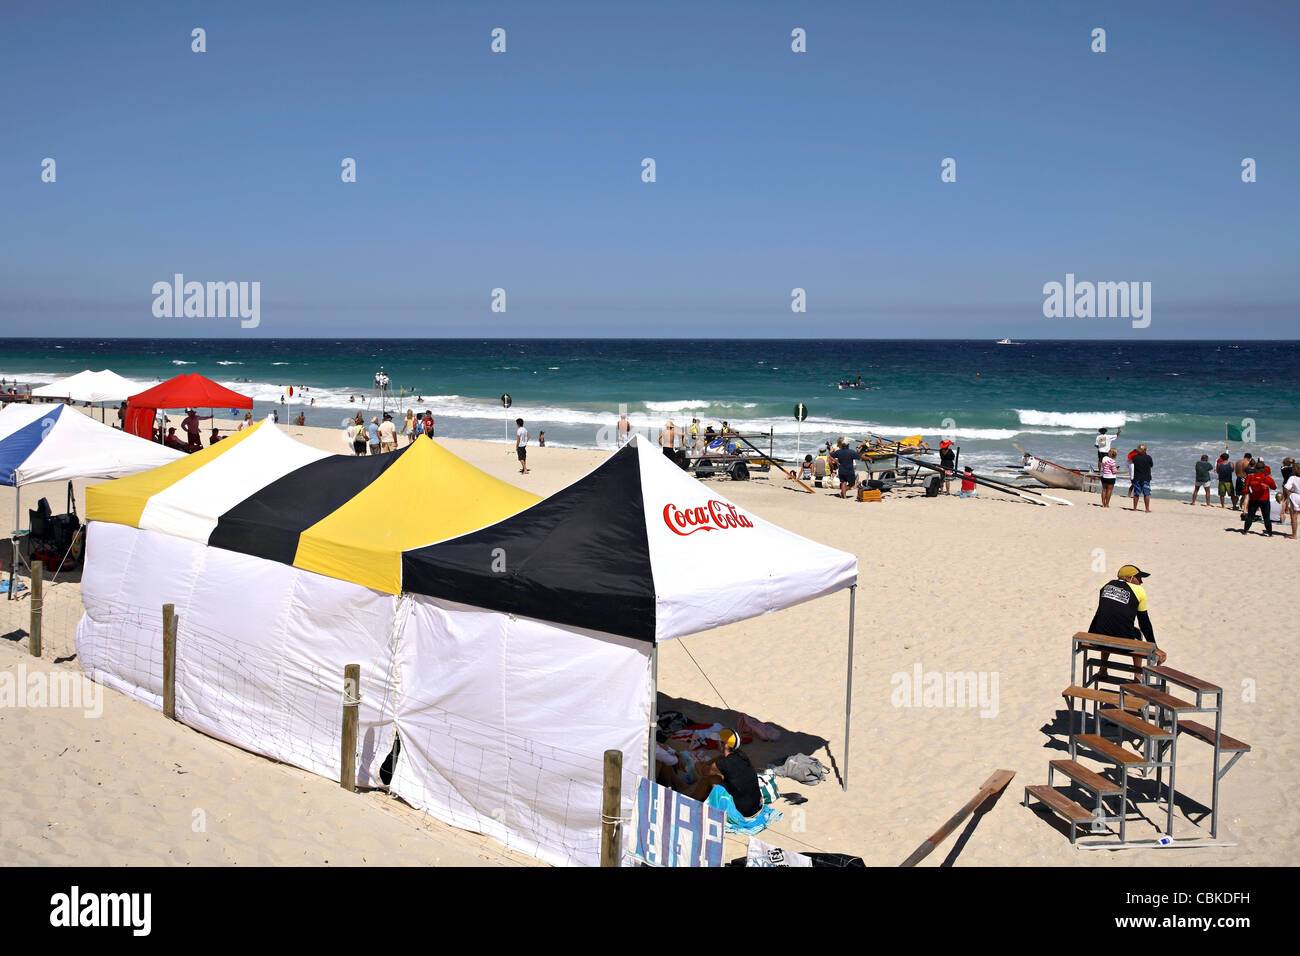 Surf Life Savers Tents on Scarborough Beach and Indian Ocean, Perth Western Australia Stock Photo